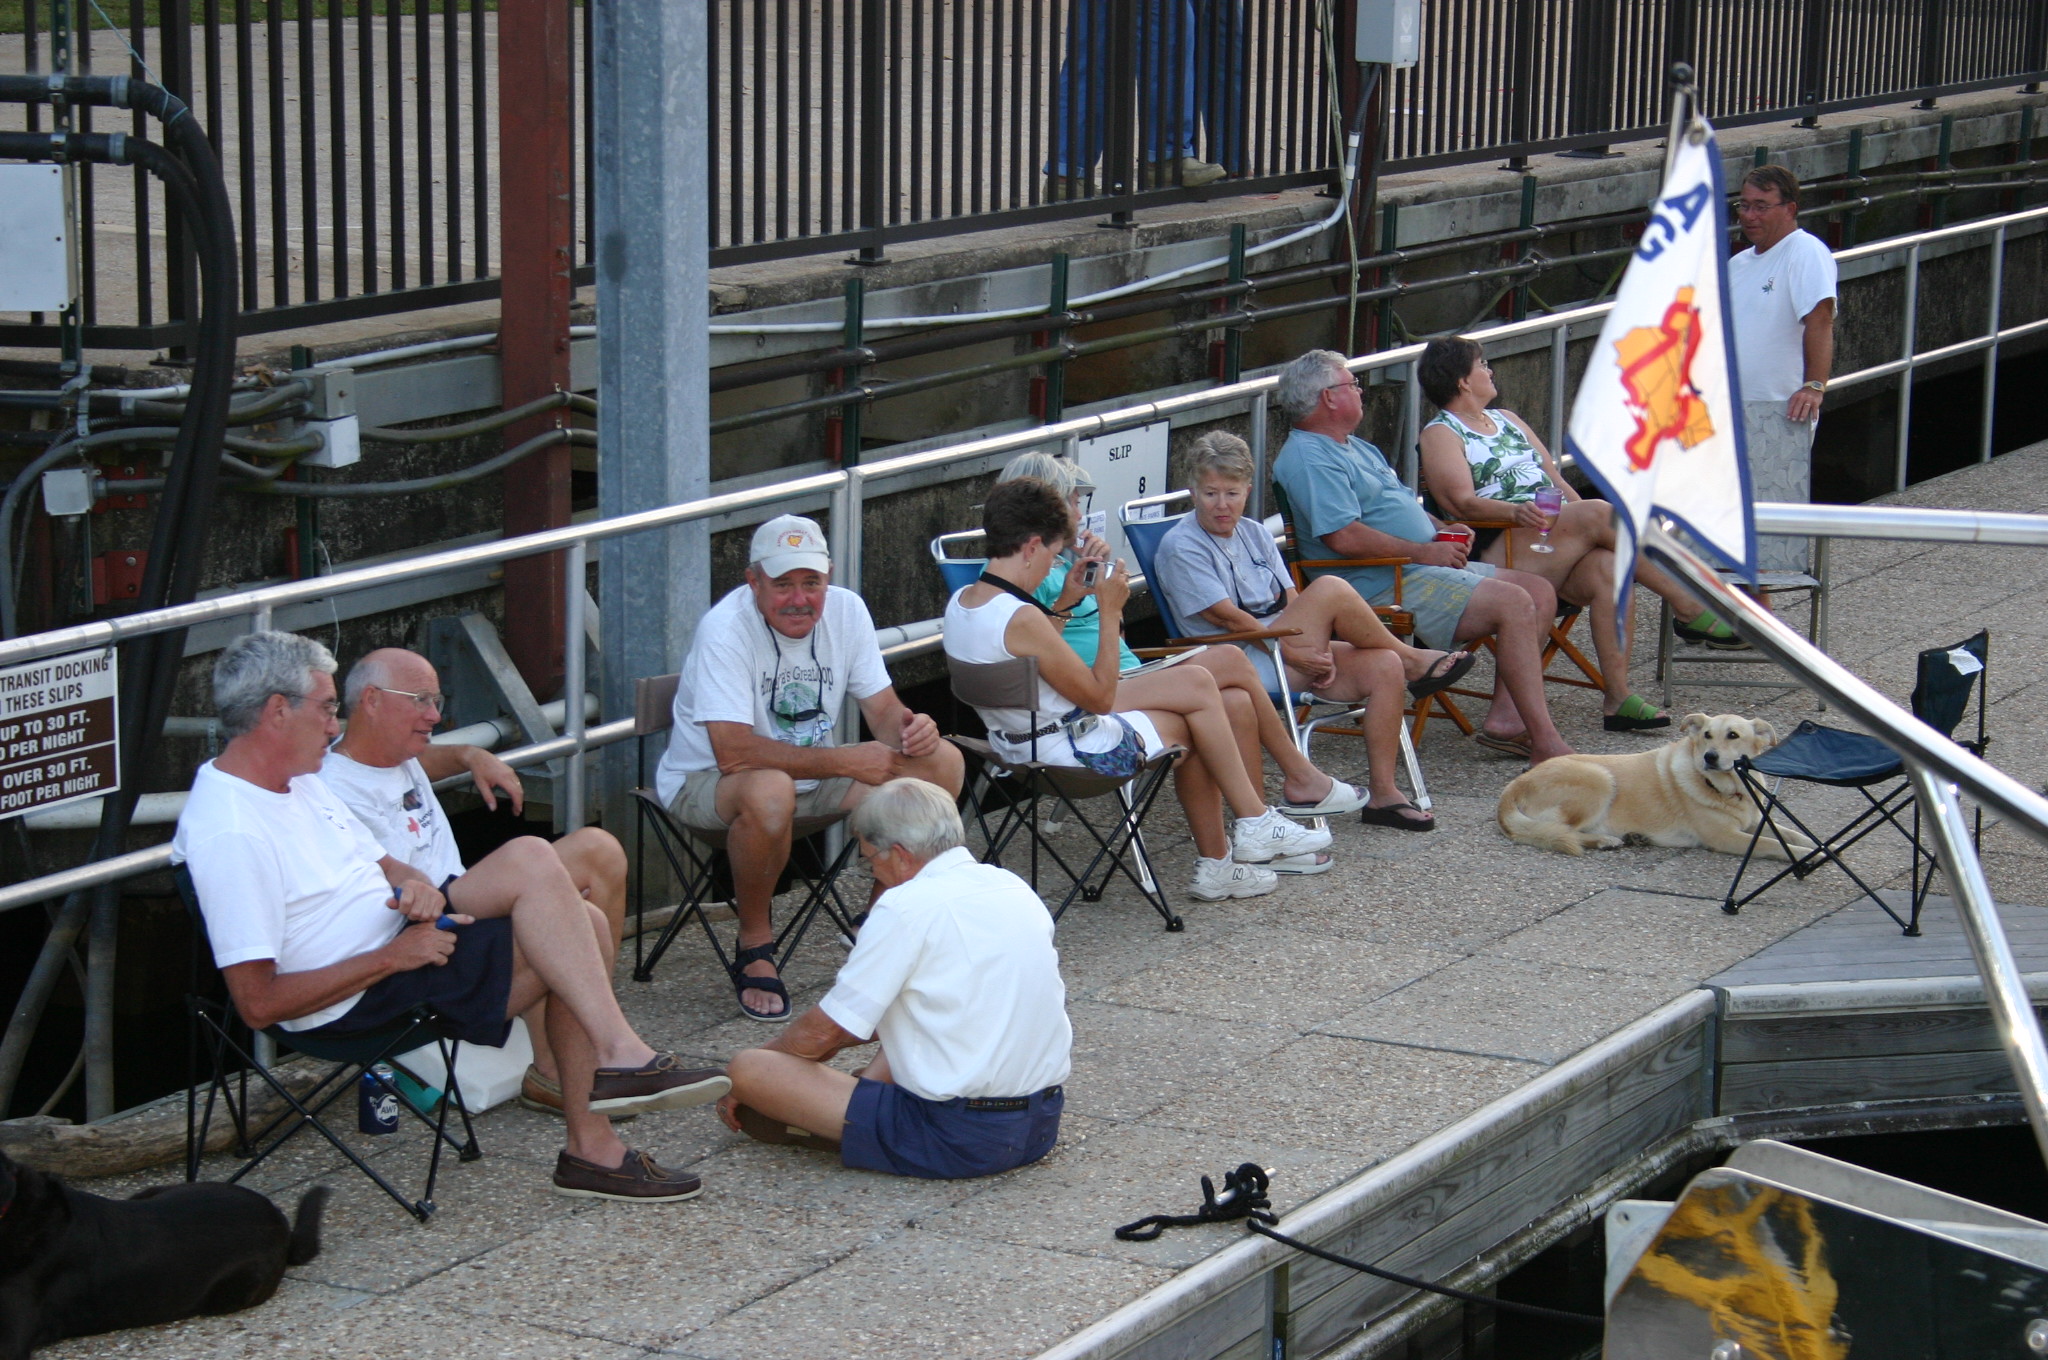 AGLCA burgee on the bow, at the 2004 rendezvous, Joe Wheeler State Park. Fred Myers seated on dock giving us all some good advice!